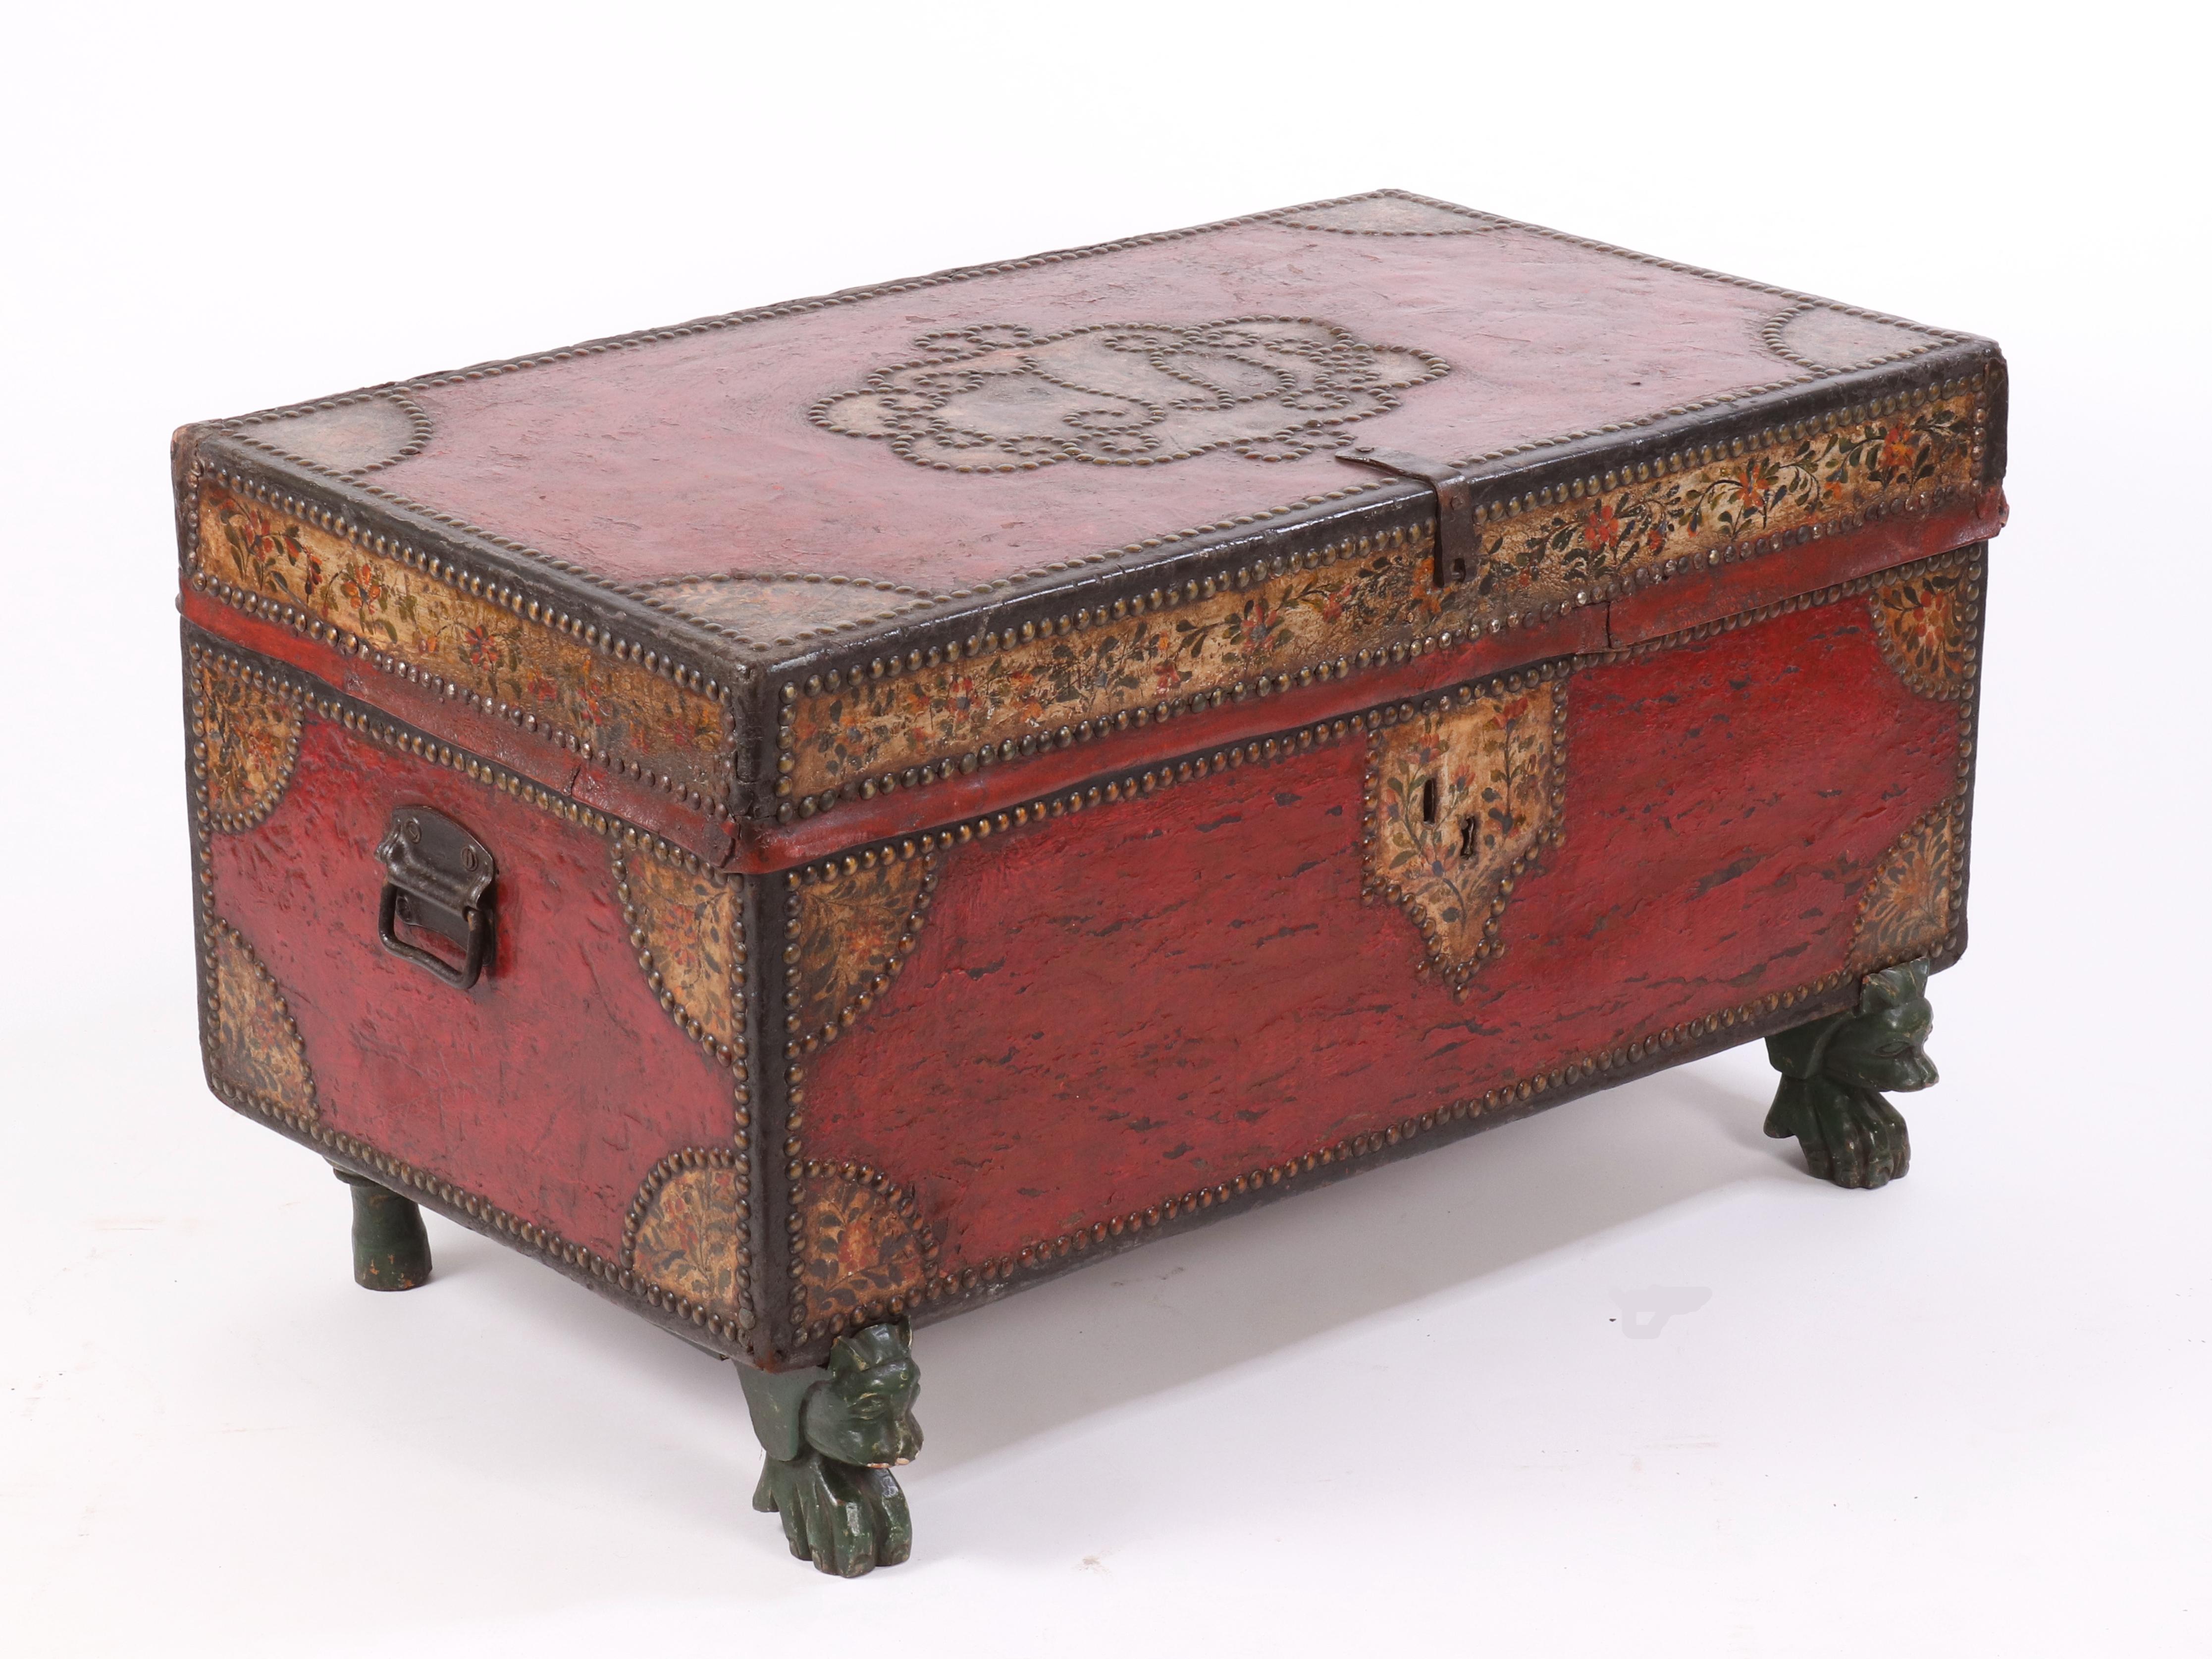 Chinese Export camphor wood and leather trunk with iron carrying handles, painted red with floral borders, corners and escutcheon, decorated with brass tacks; the carved and painted base a later addition.
Measures: 37